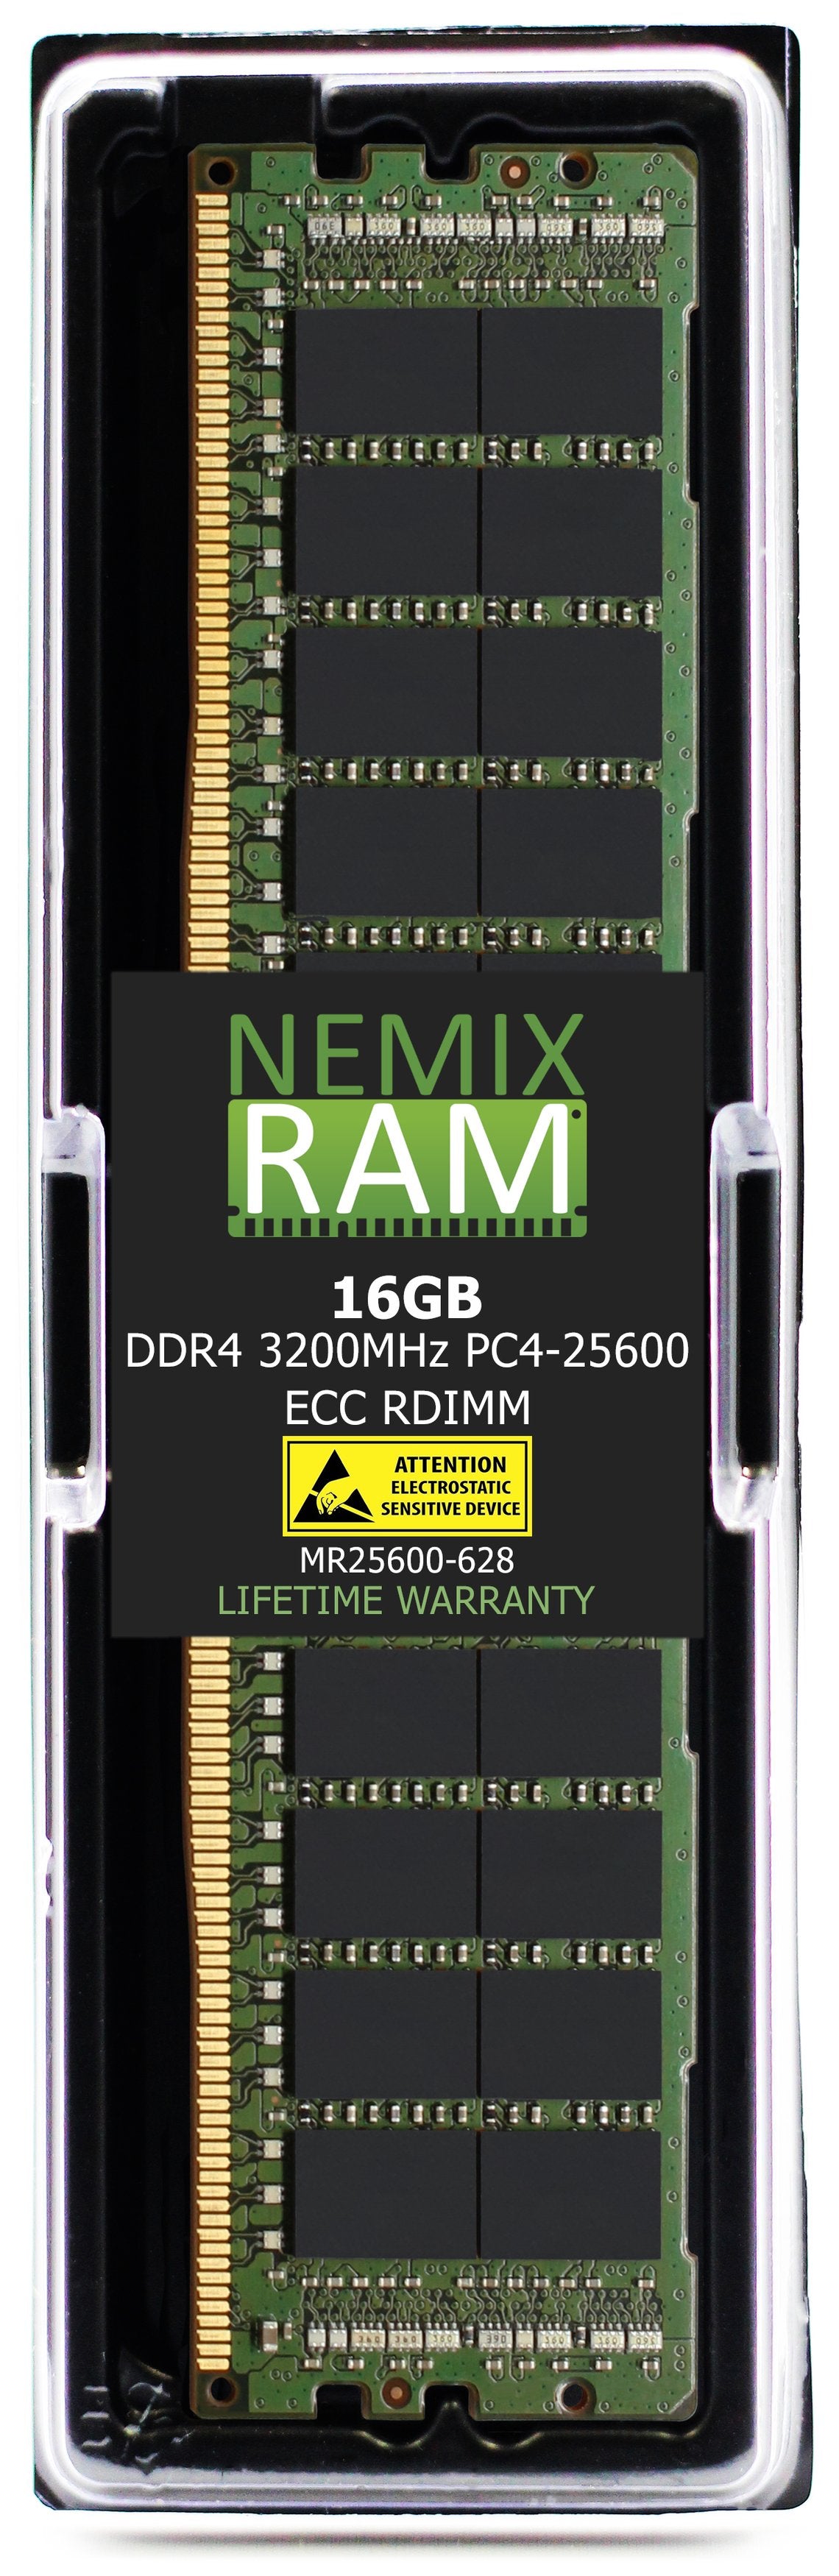 16GB DDR4 3200MHZ PC4-25600 RDIMM Compatible with Supermicro MEM-DR416LD-ER32